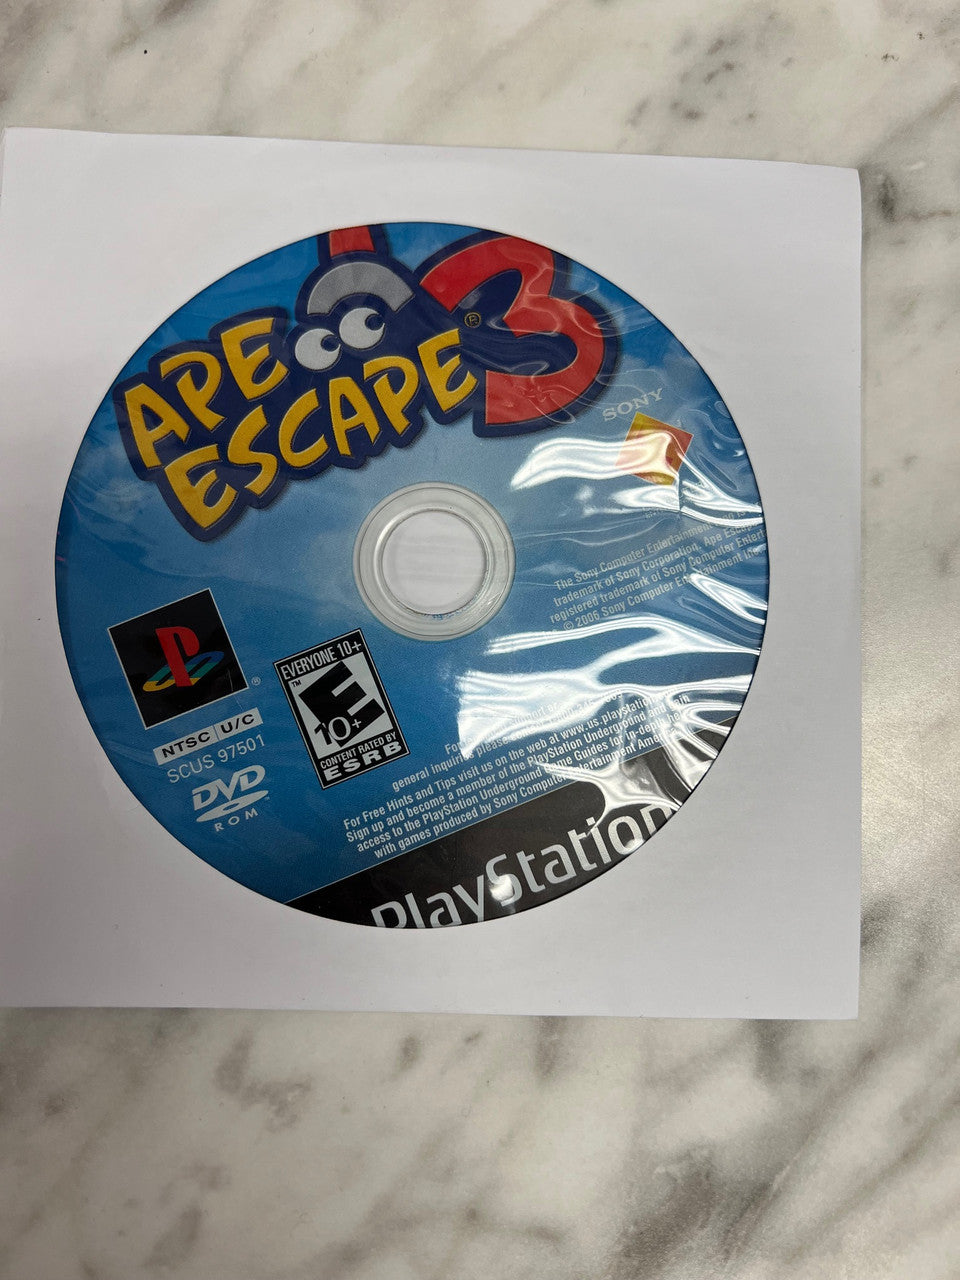 Ape Escape 3 PS2 Playstation 2 Disc Only